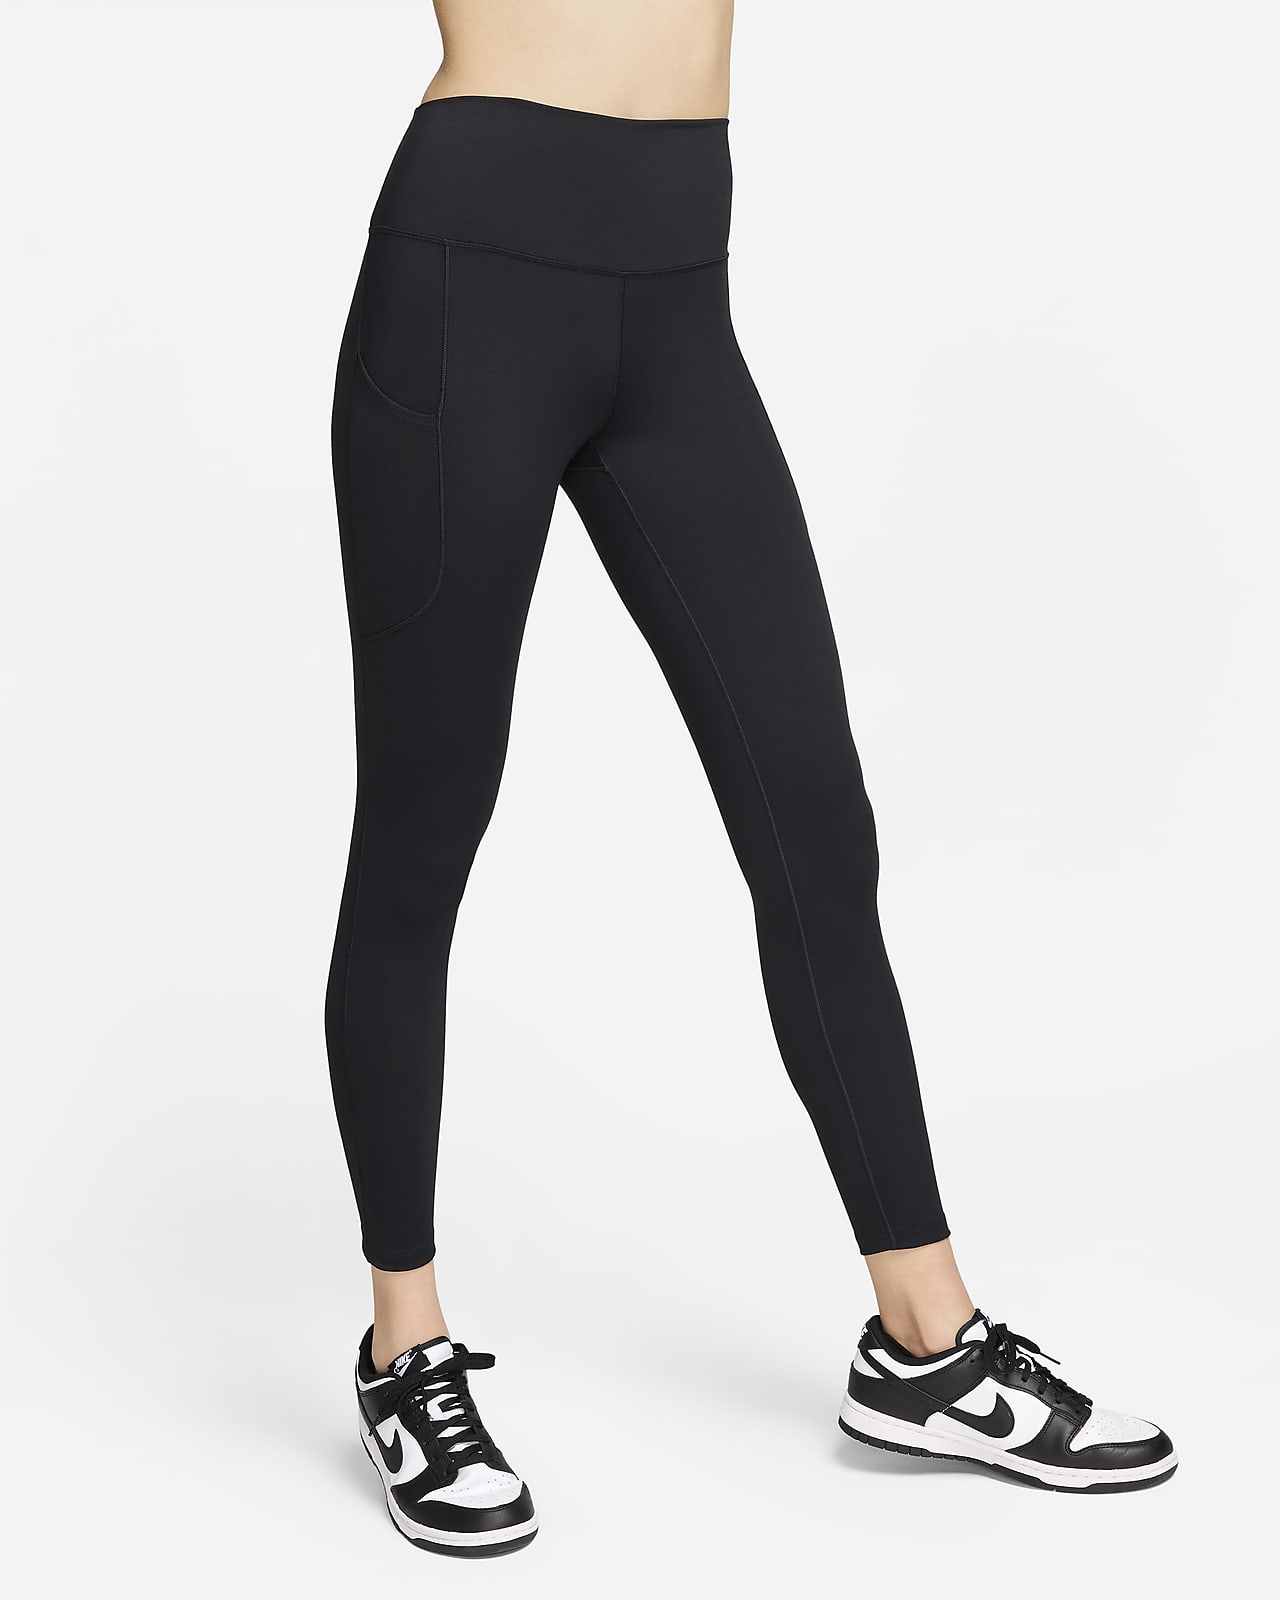 Embroidered Womens Nike One Dri-FIT 7/8 Leggings